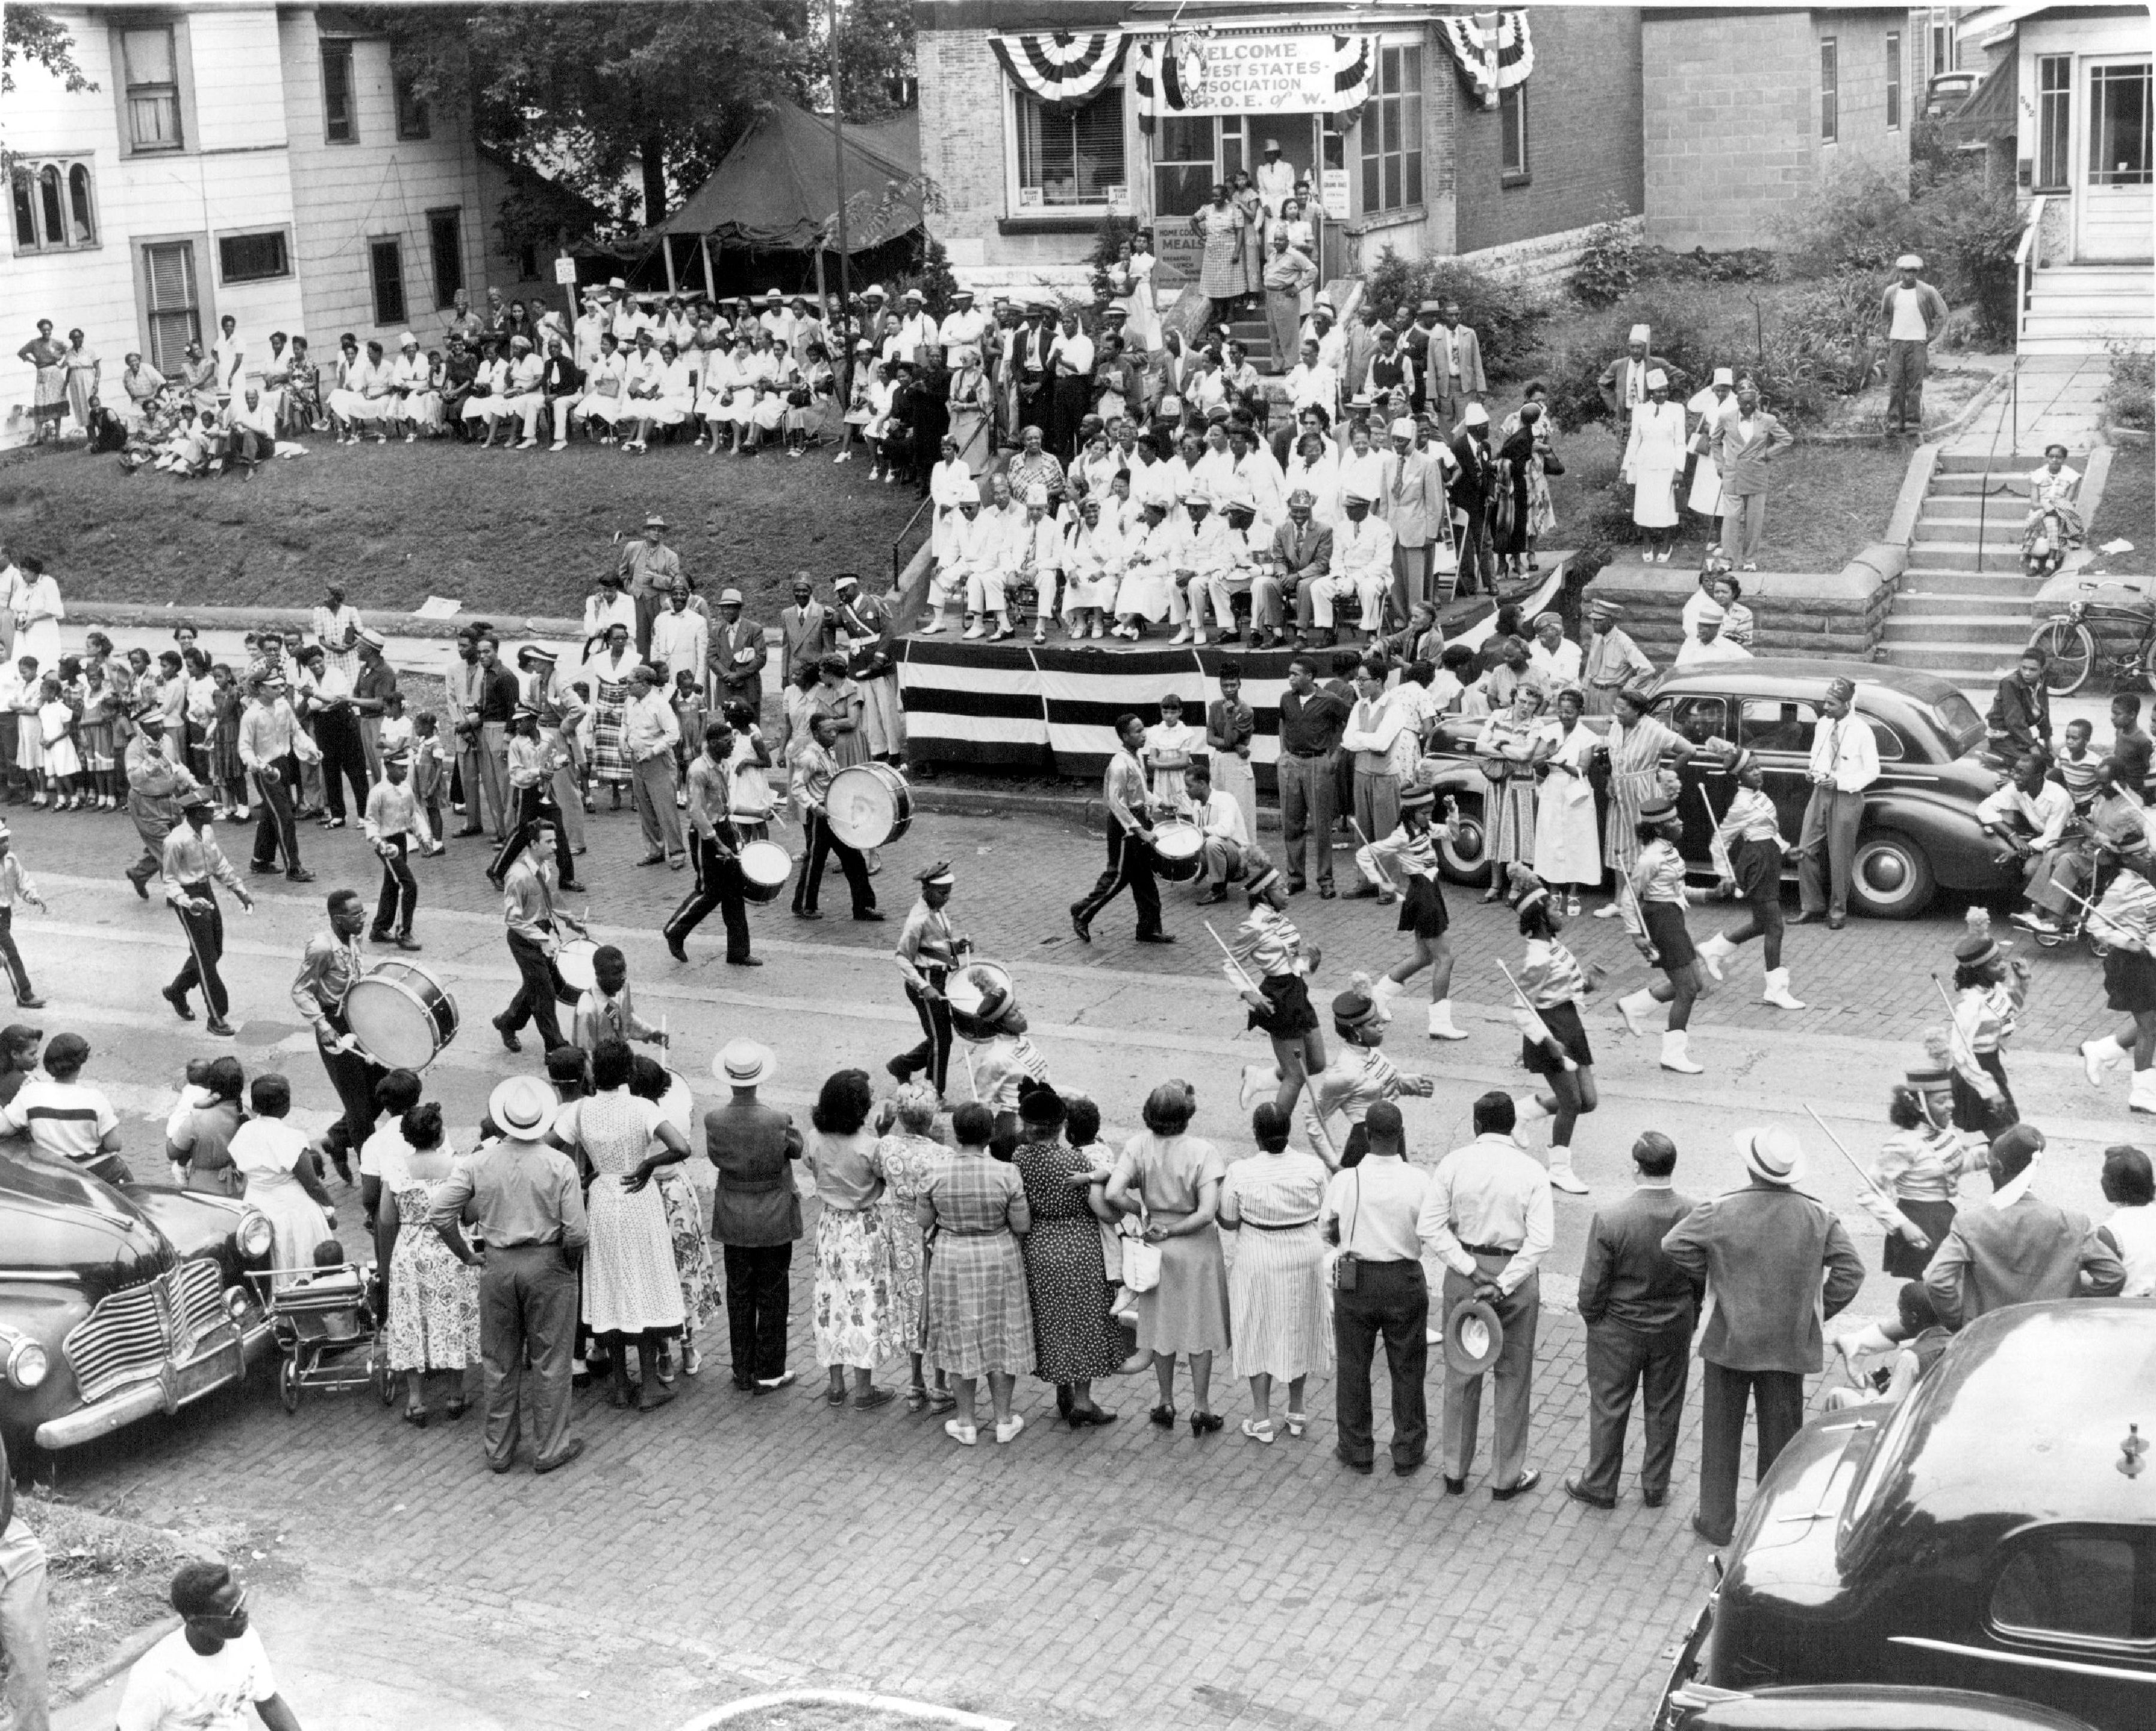 In July 1951, the Ralph Bates Marching Club from Omaha, Nebraska, passed the reviewing stand at 588 Rondo Ave. in St. Paul during a parade.